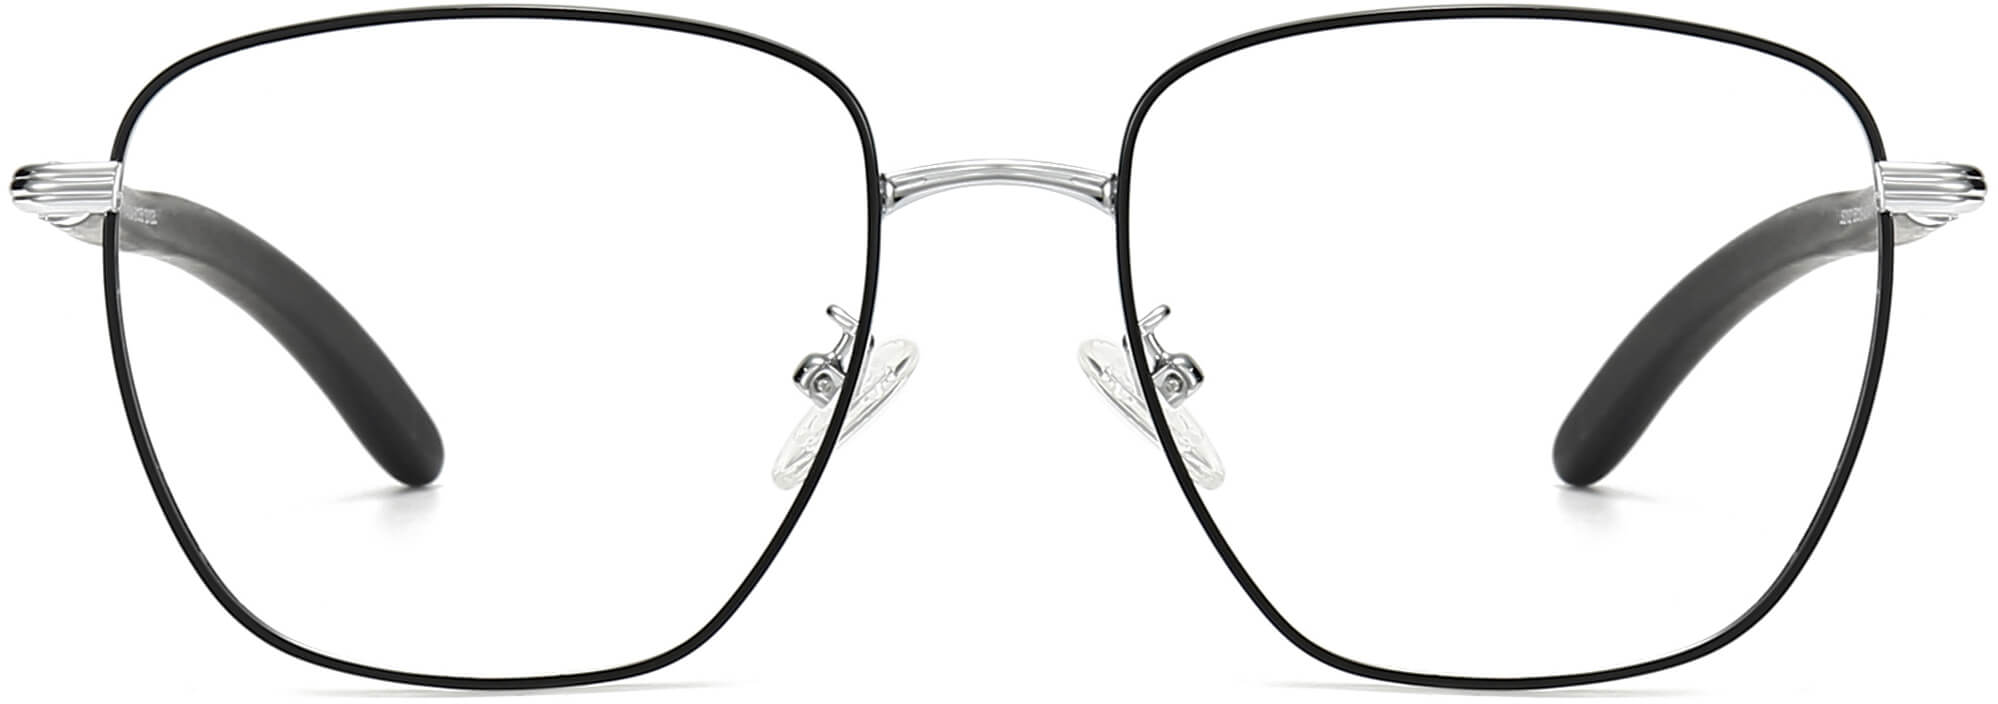 Bo Square Black Eyeglasses from ANRRI, front view